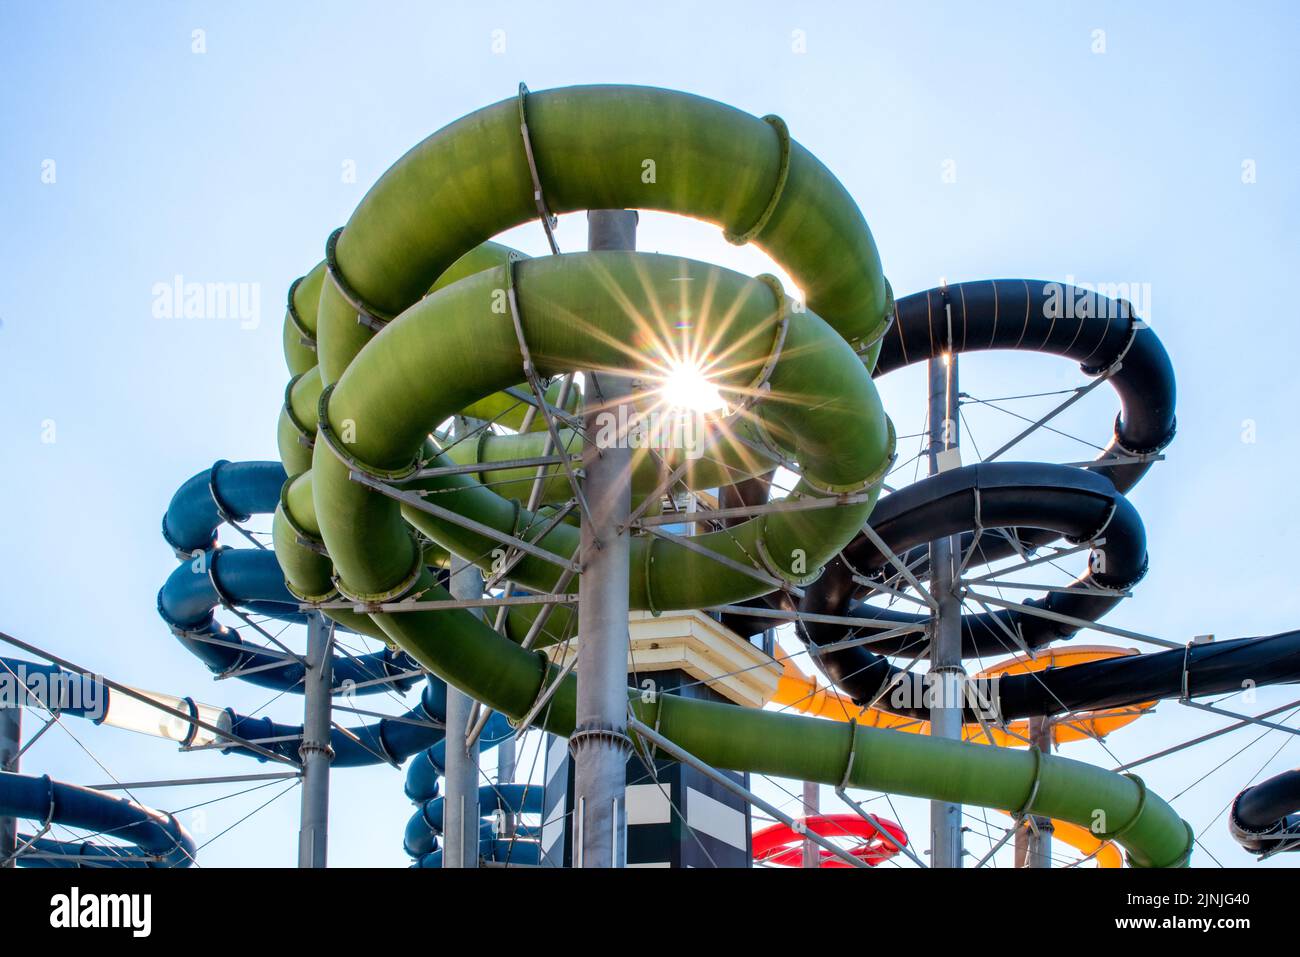 Colorful water slides in aqua park Stock Photo